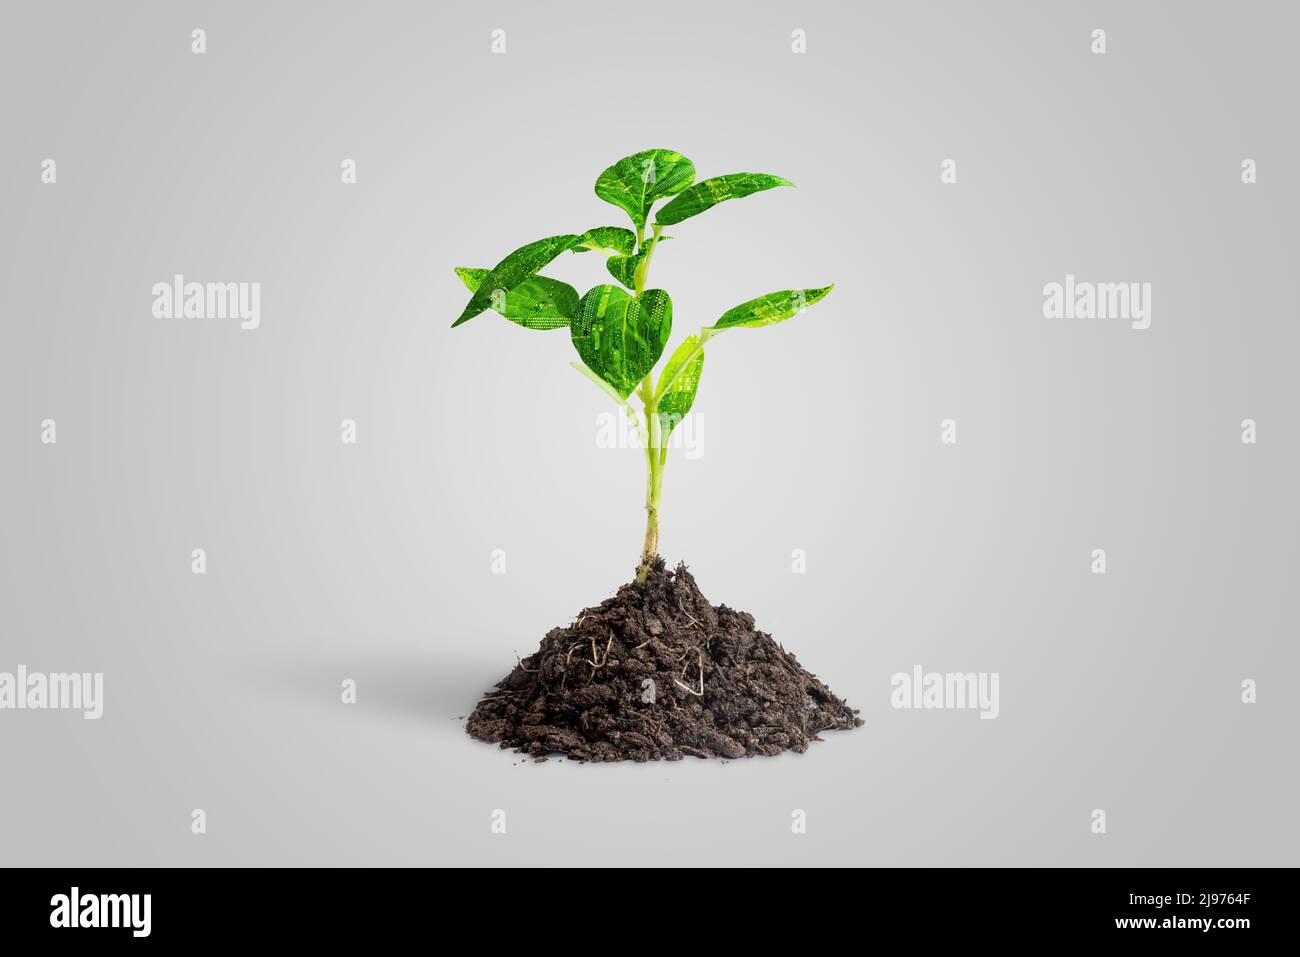 Artificial plant grows from natural soil. The leafs are made of electronic printed circuit boards. The concept of using technology in agriculture Stock Photo